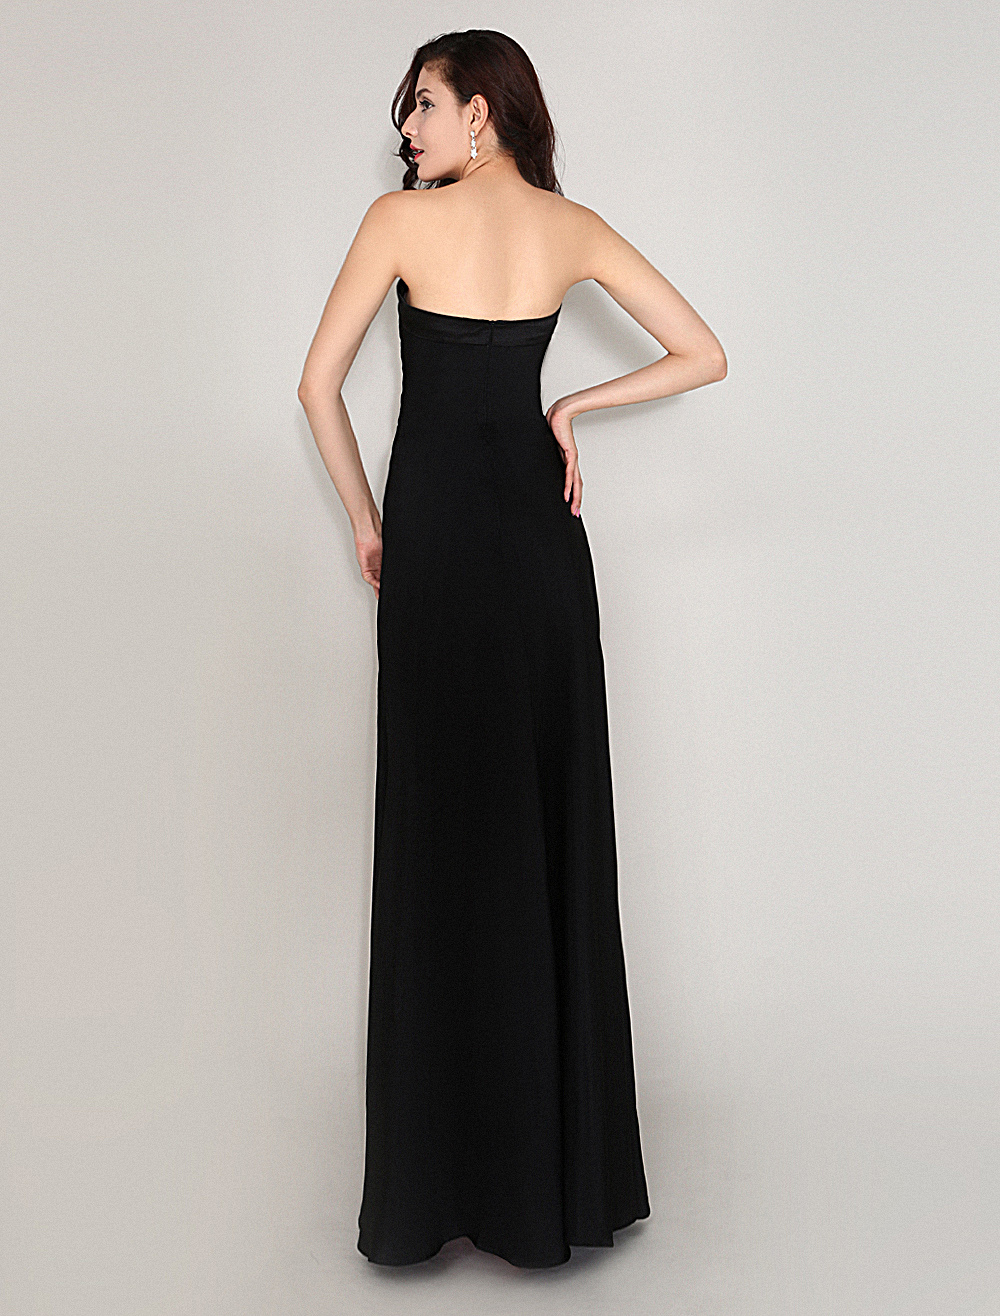 Elastic Woven Satin Draped Evening Dress With Strapless Floor-Length ...